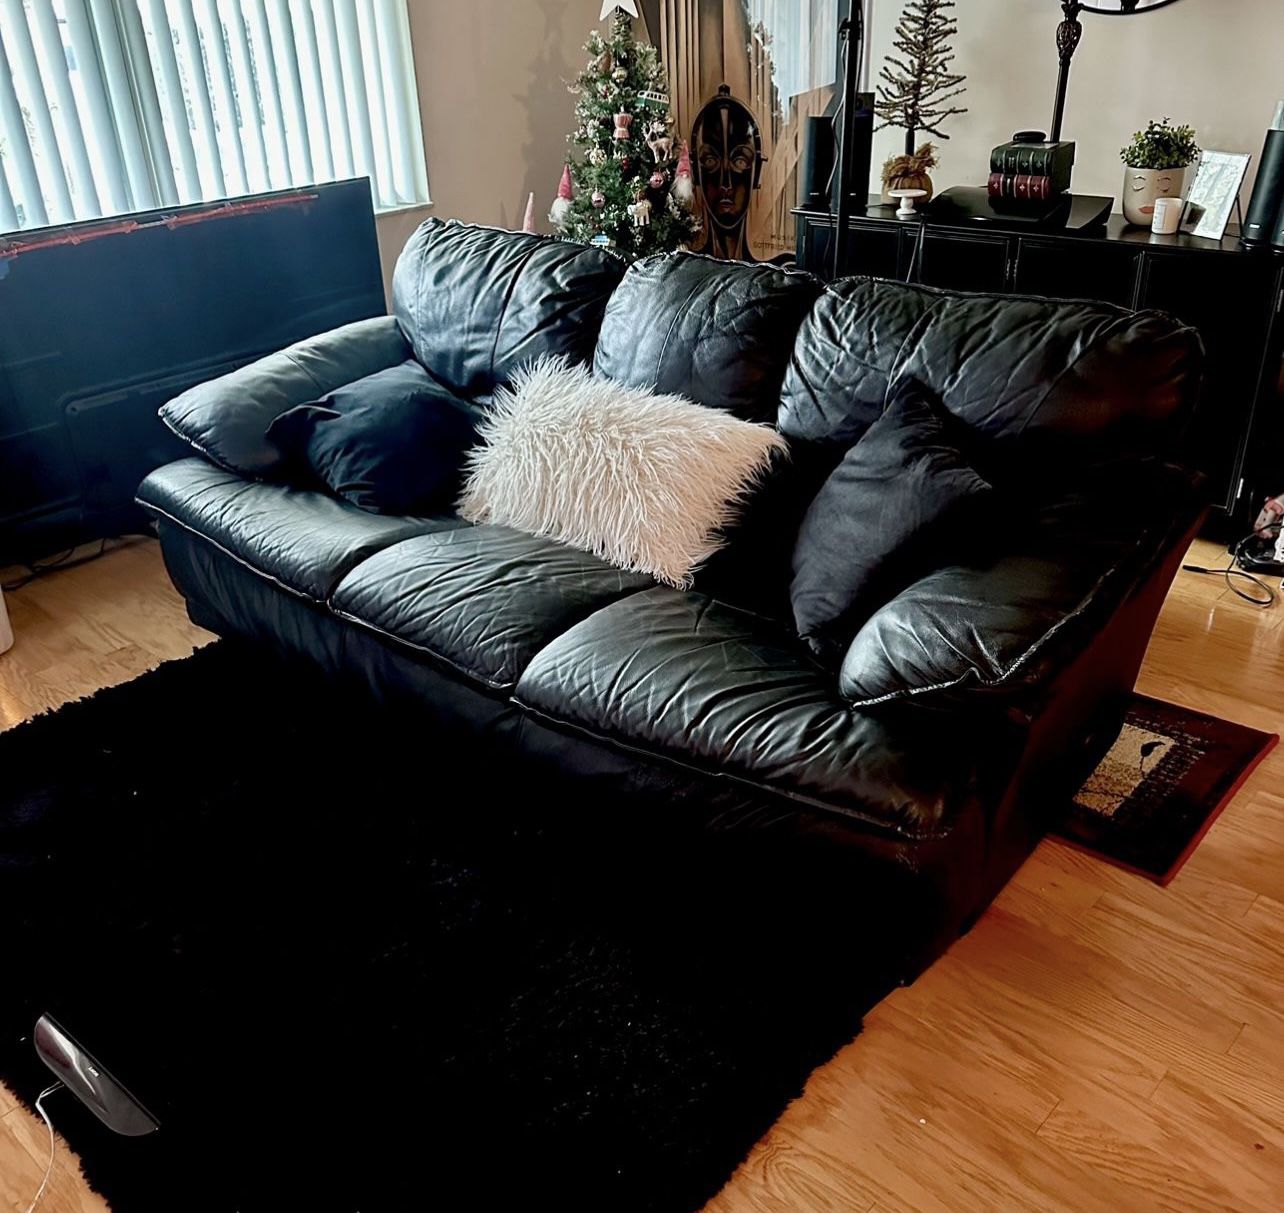 Black Sofa comfortable to sit on  NEED GONE ASAP!!! Couch  in Boca Raton!!